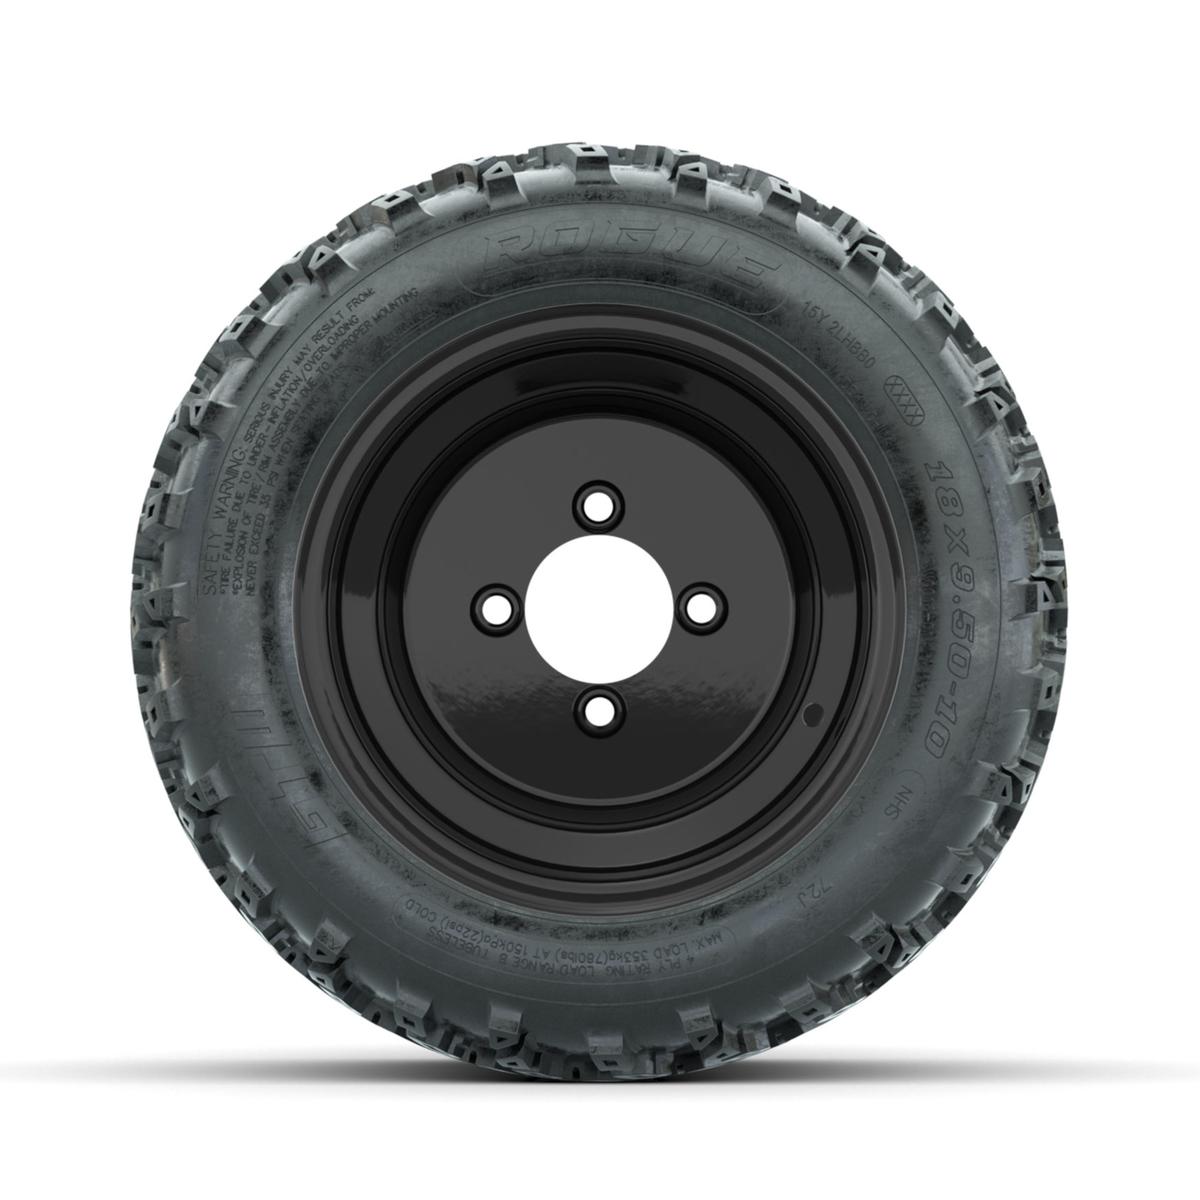 GTW Steel Black 10 in Wheels with 18x9.50-10 Rogue All Terrain Tires – Full Set